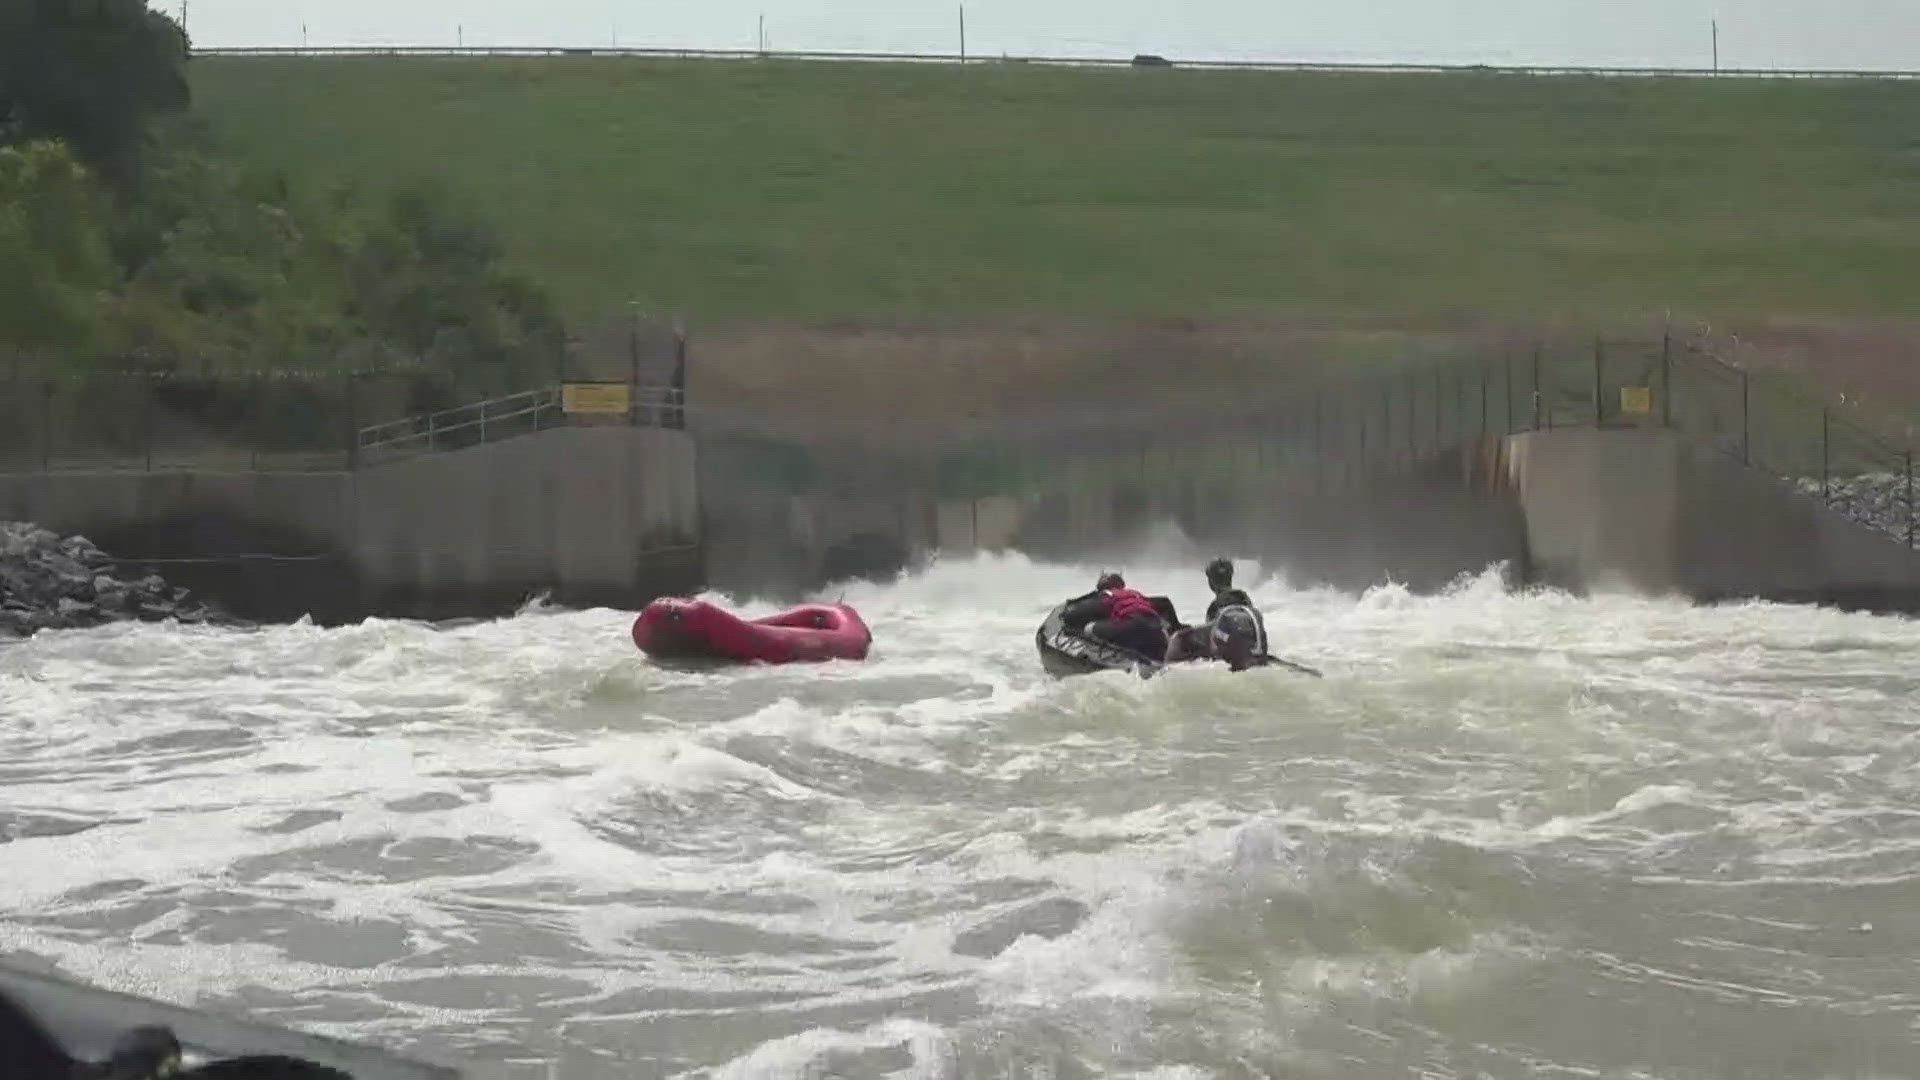 Crews from the Killeen, Temple and Bryan Fire Departments ran exercises at the Belton Dam to practice rescues in fast-moving and hazardous water.